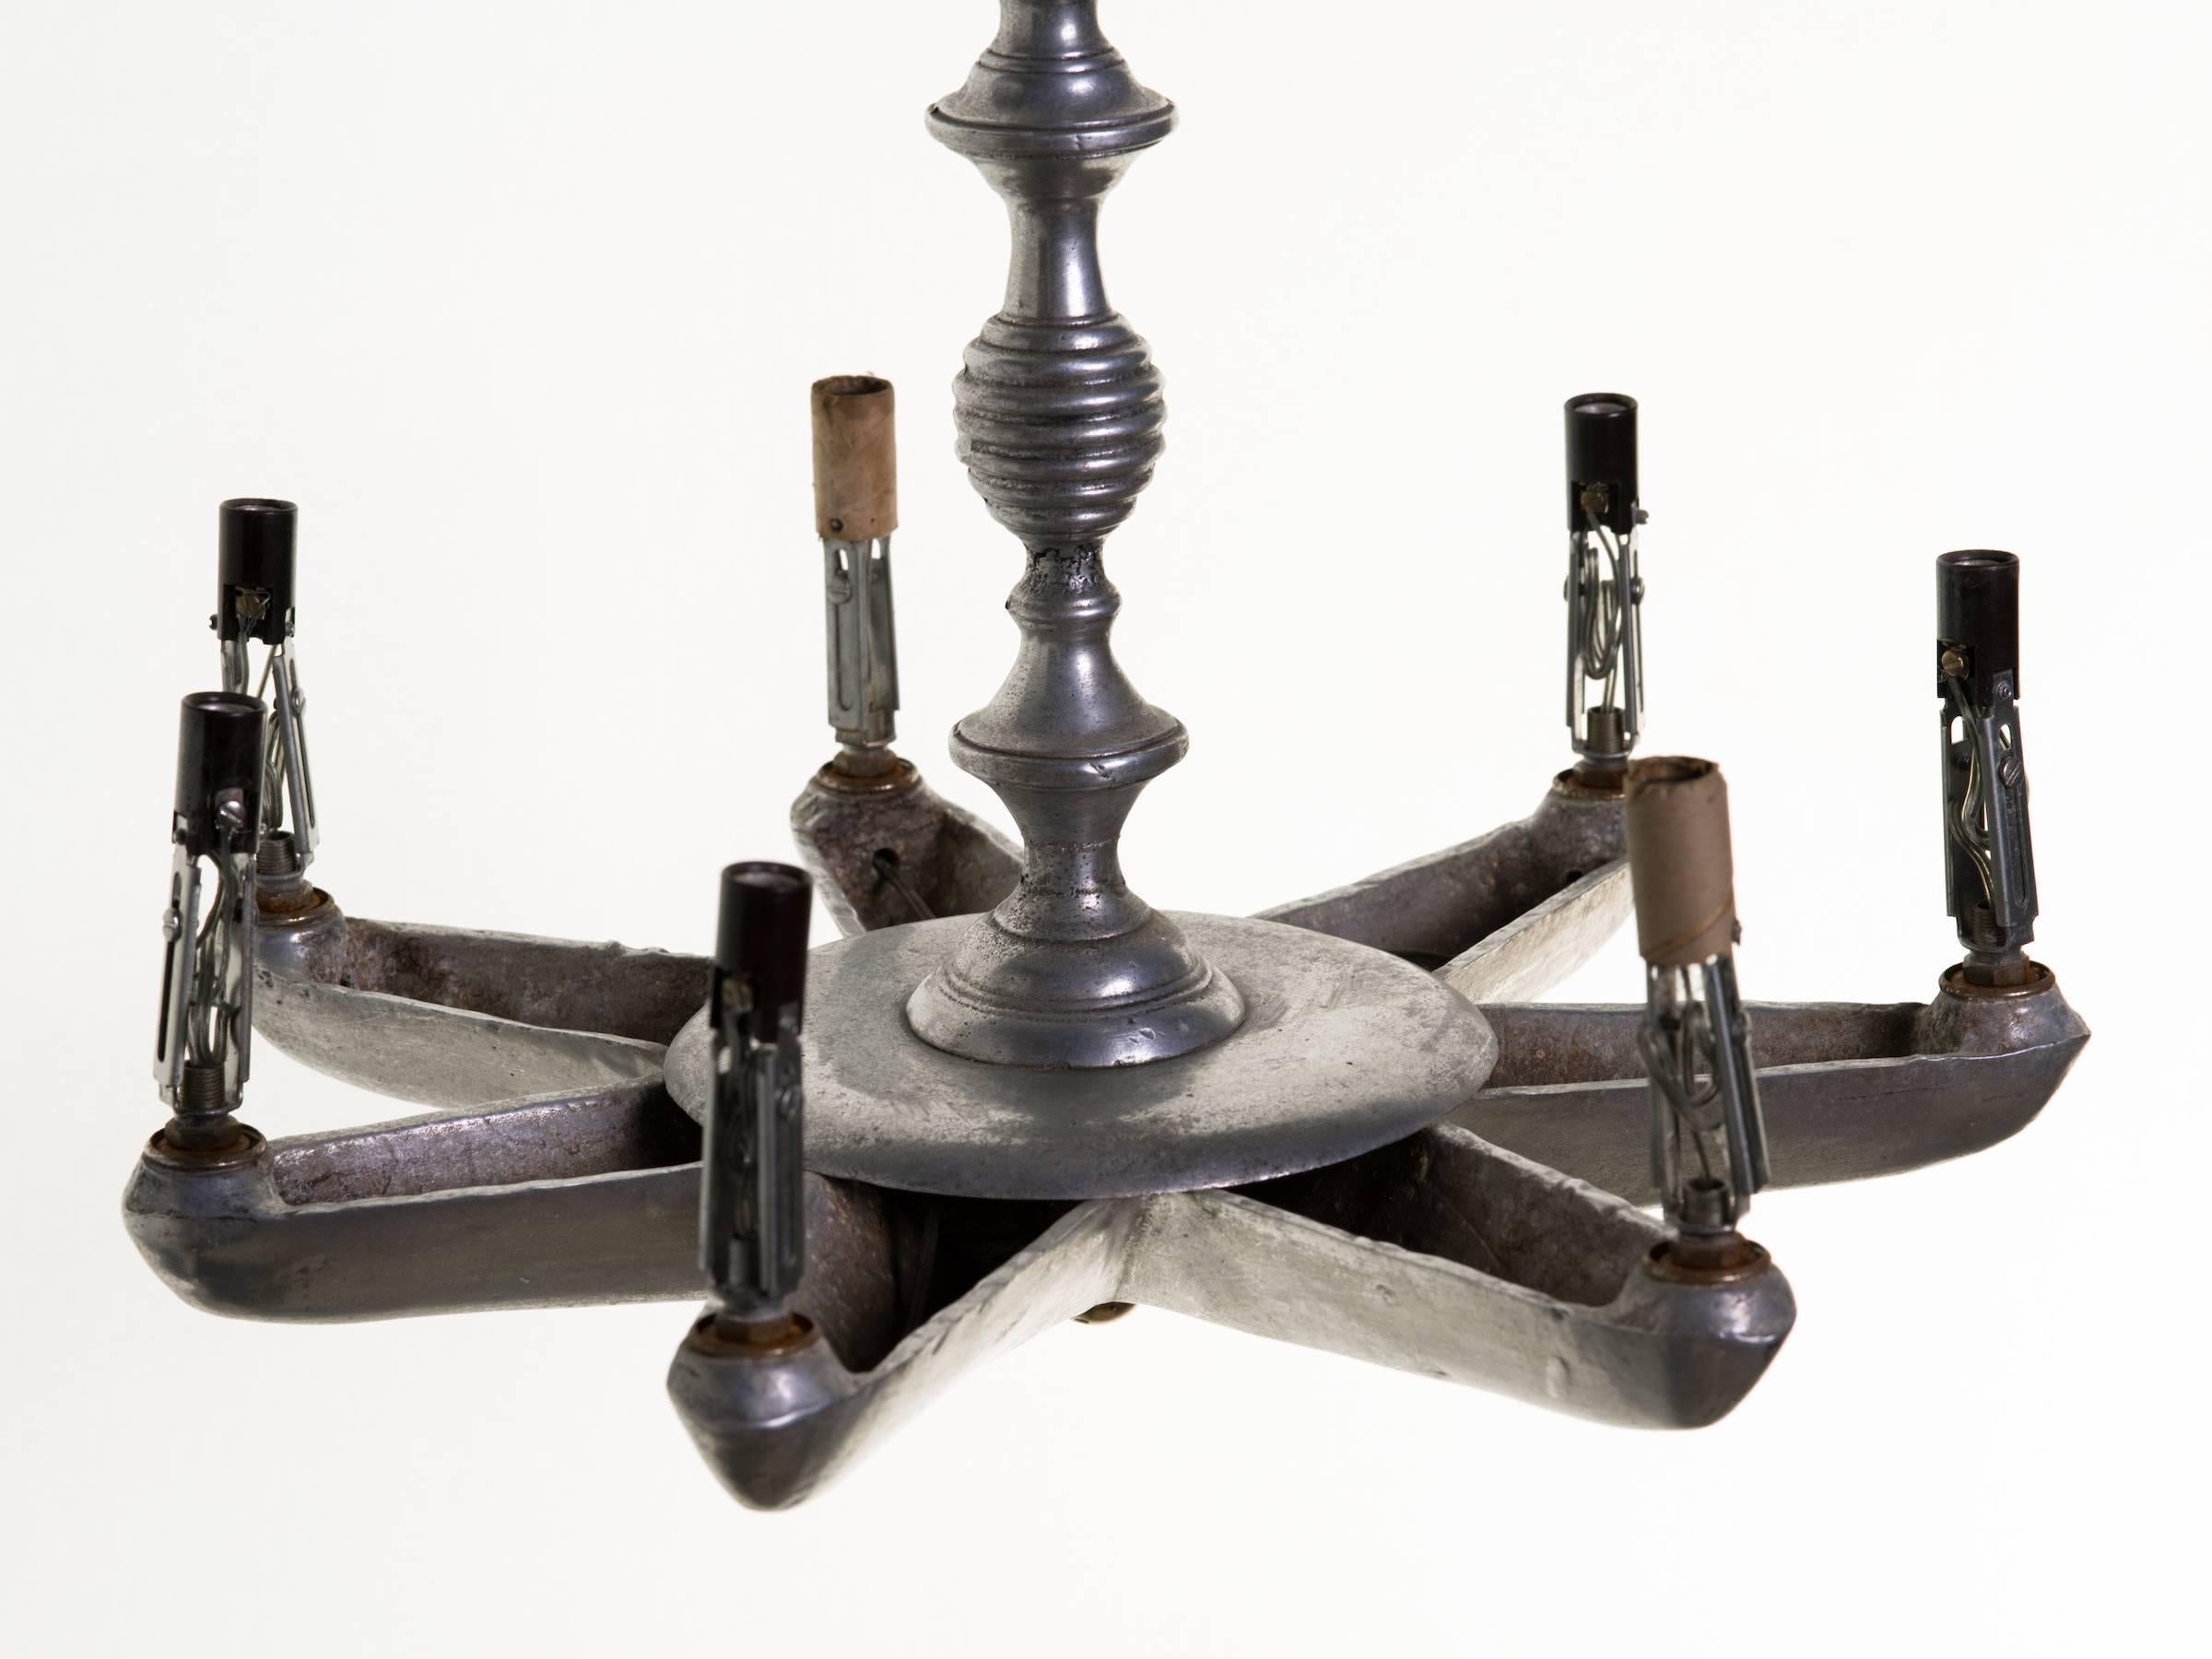 Deco, pewter, machine age chandelier from an East Hampton, NY estate.